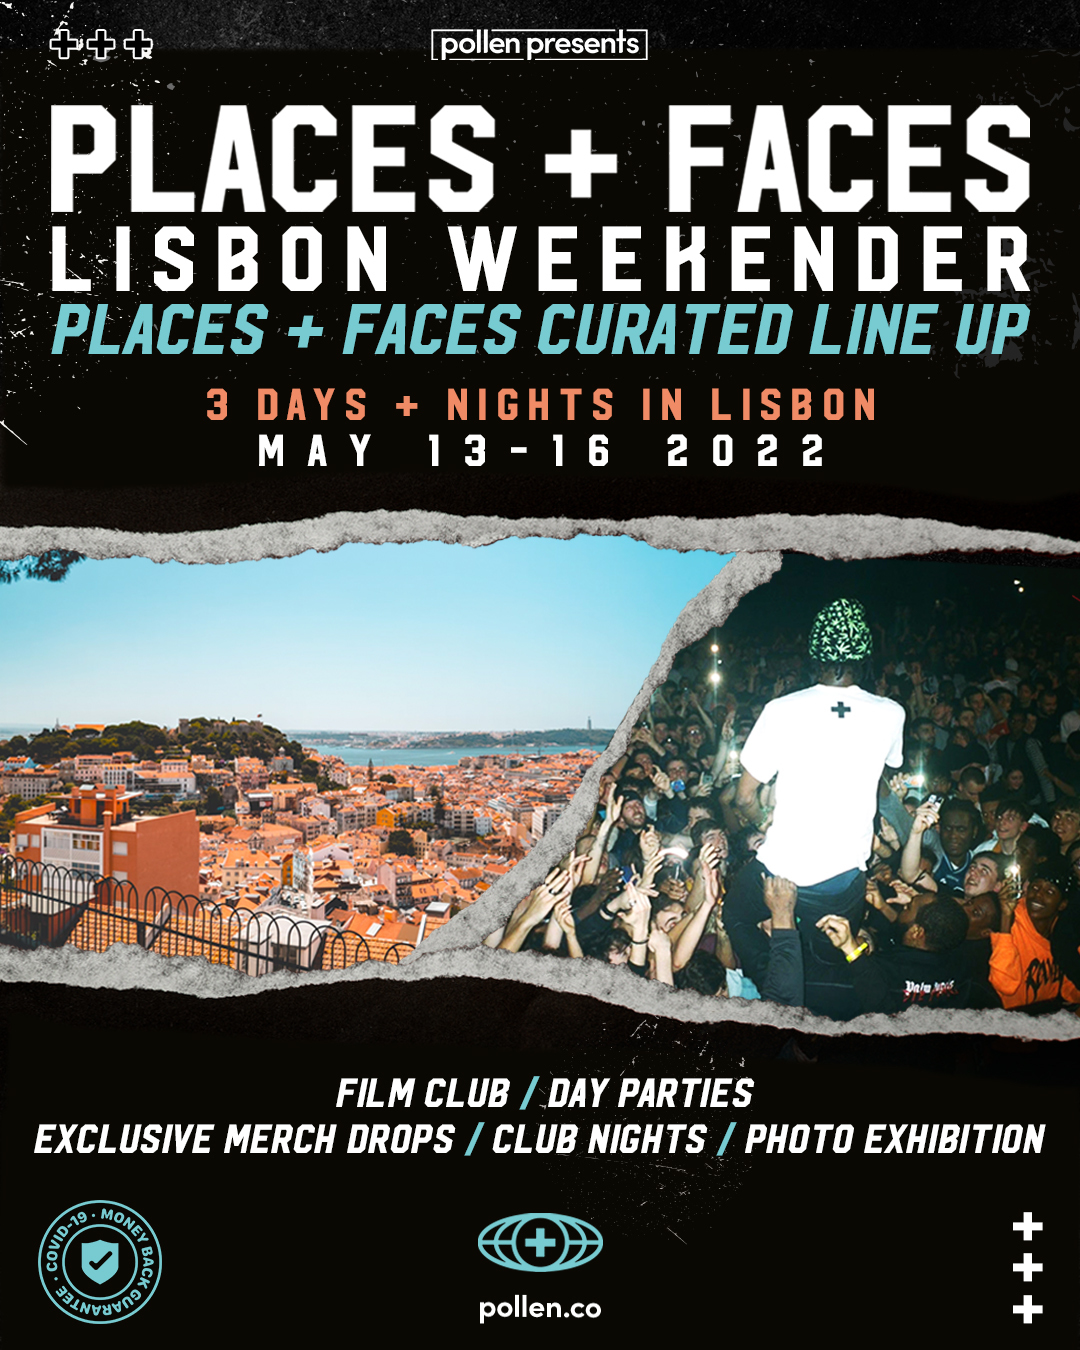 slowthai, Pa Salieu & more to play the Places+Faces Lisbon Weekender in 2022